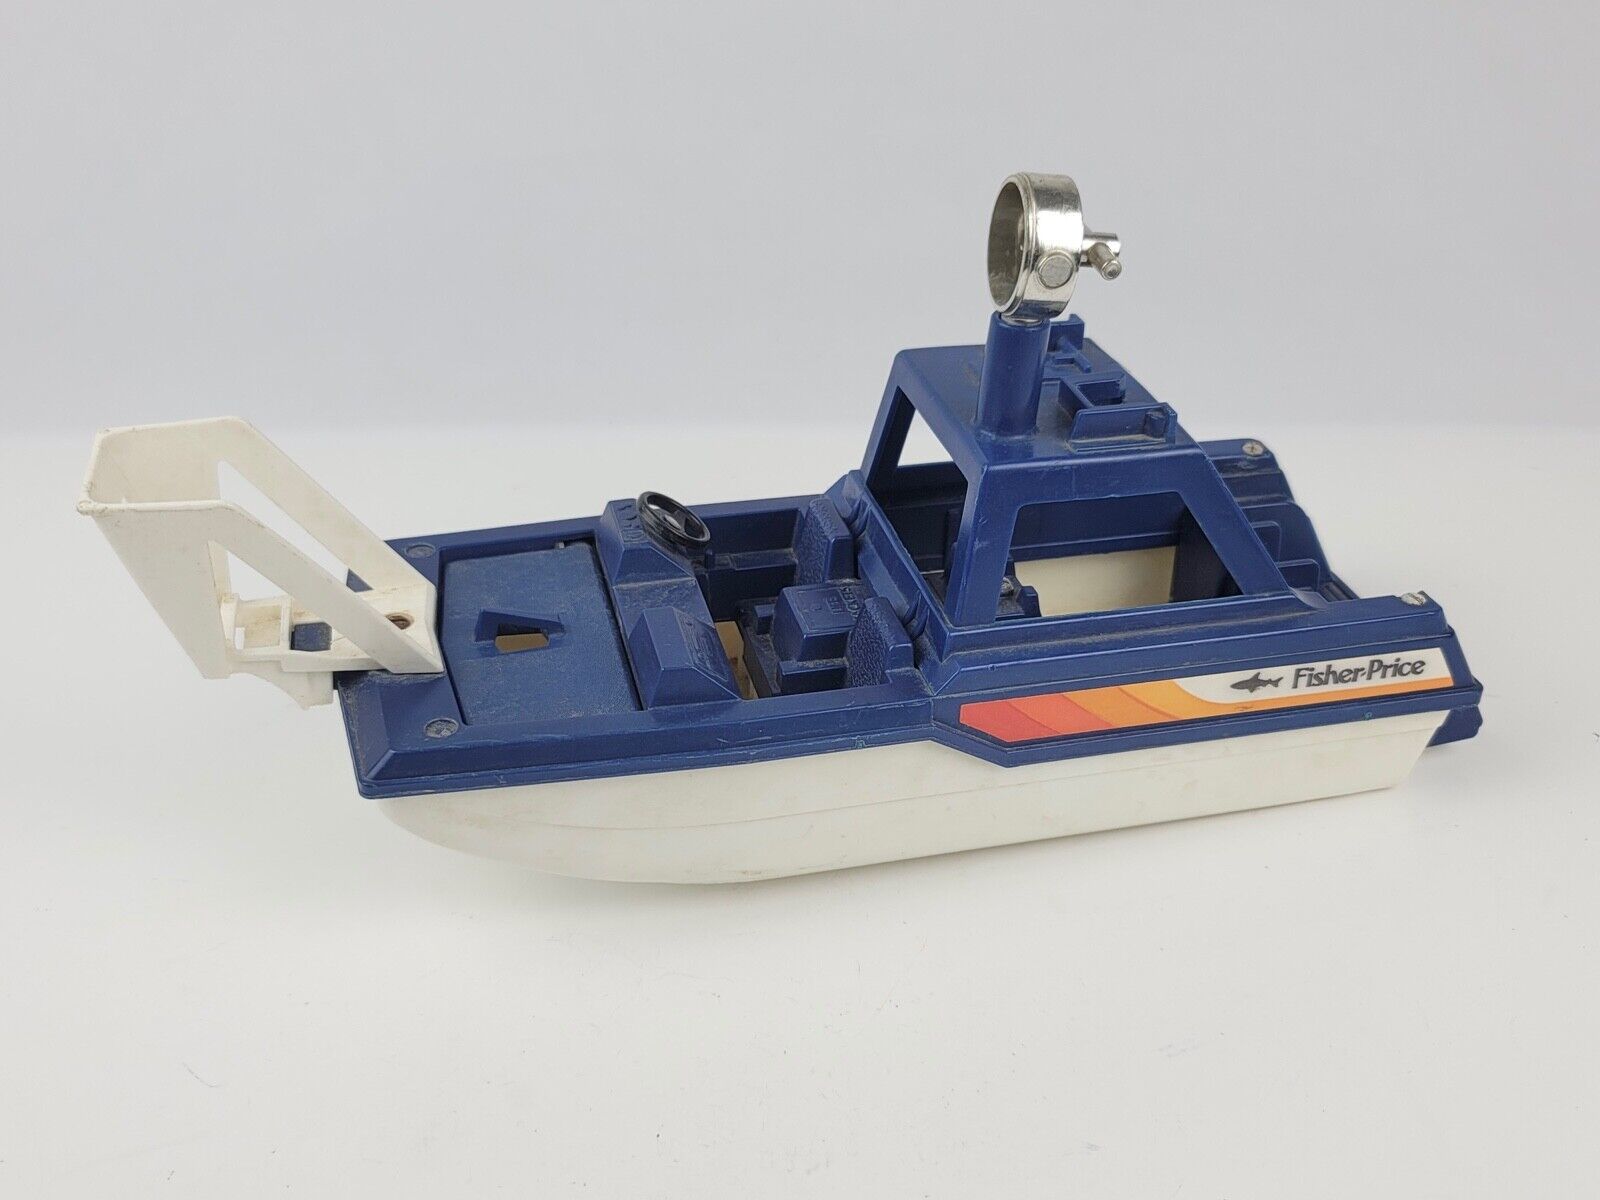 Vintage Fisher Price Adventure People Rescue Boat Sea Shark blue & white - $23.75